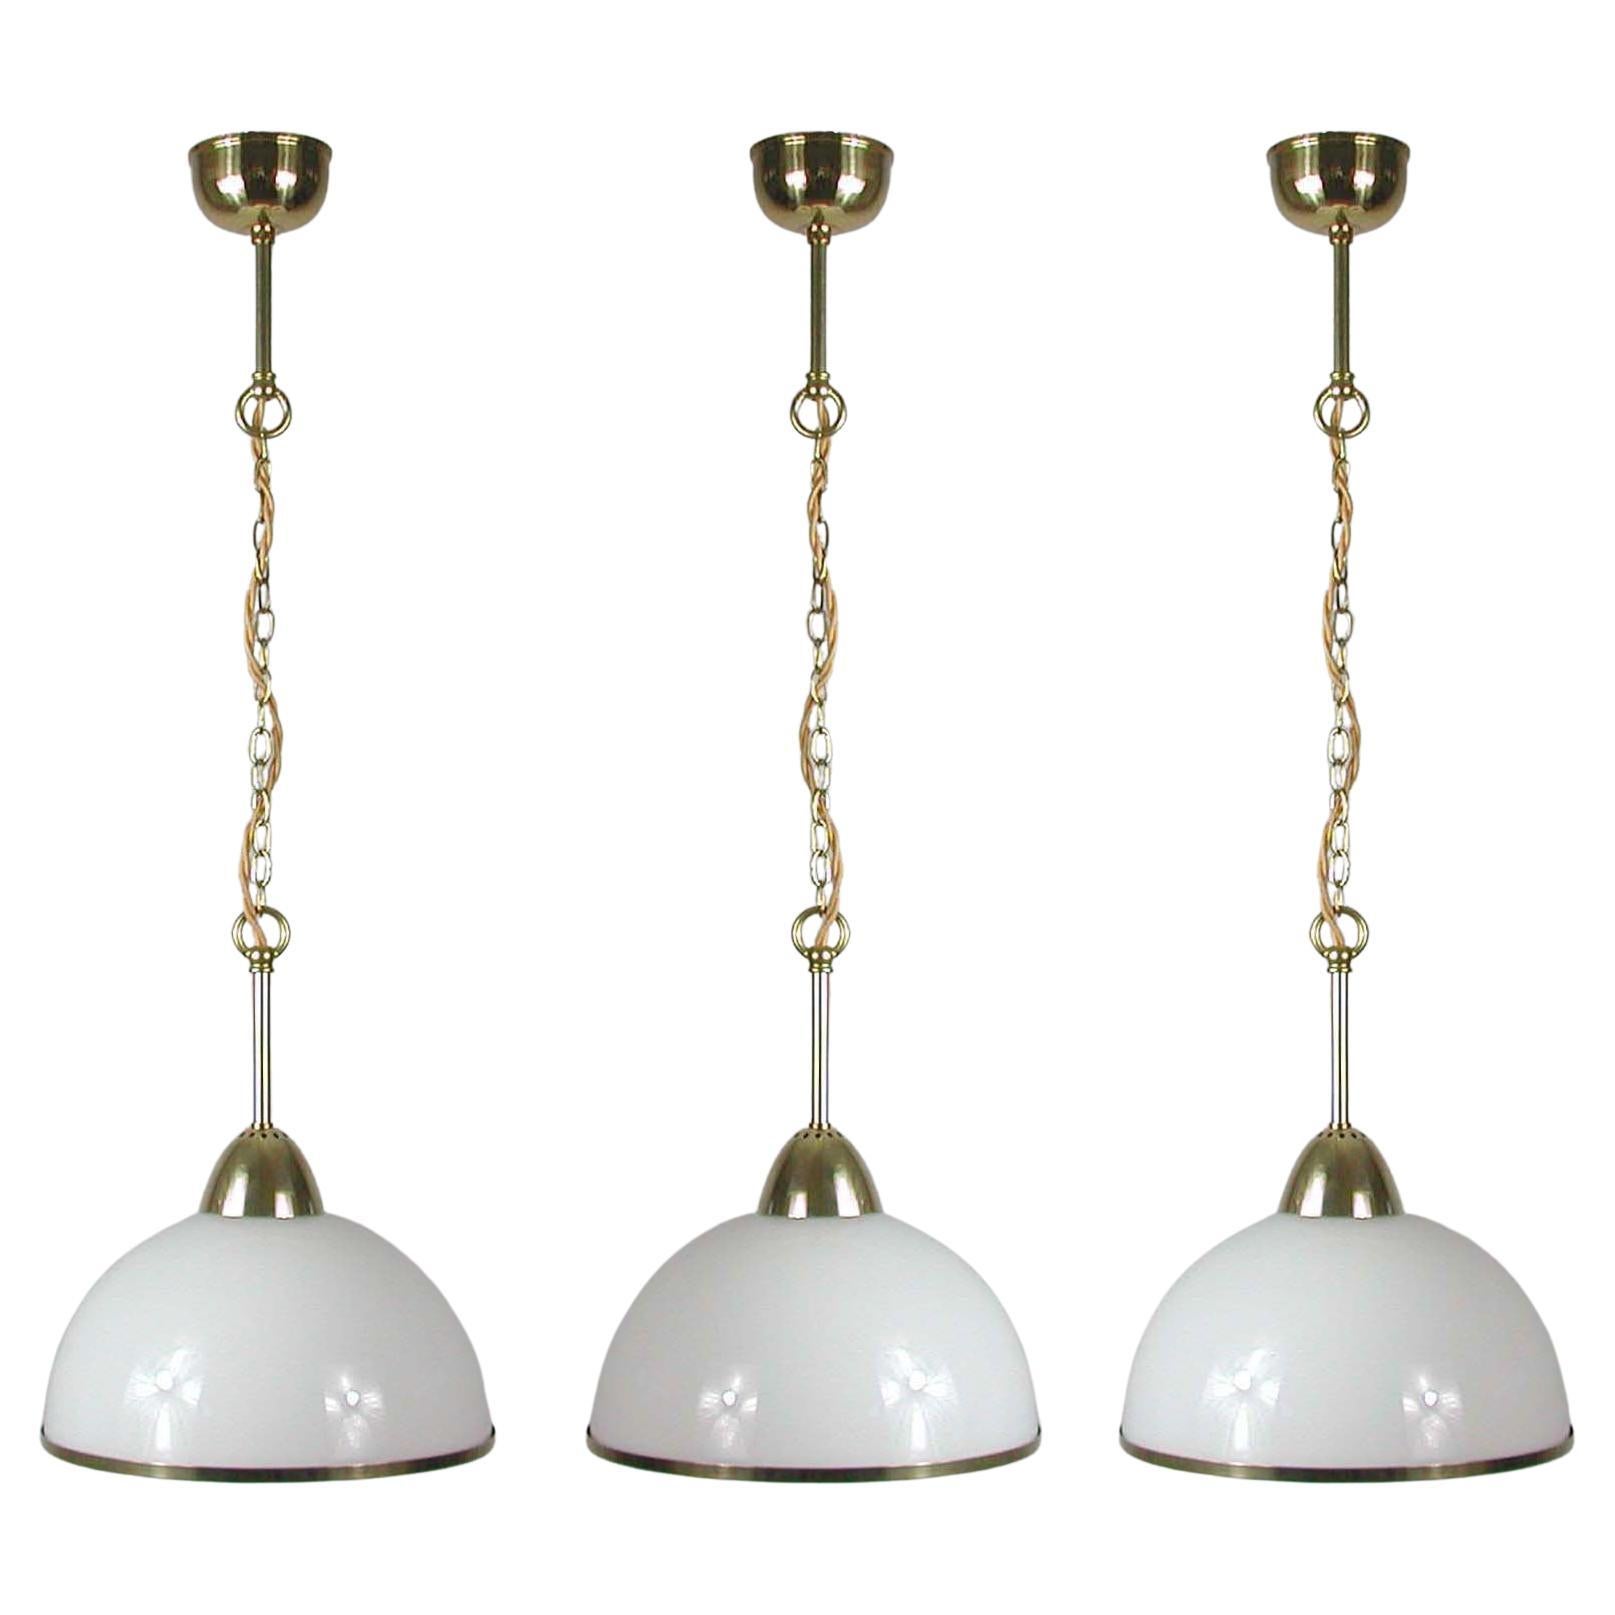 Midcentury Swedish White Opaline Glass and Brass Pendant, 1950s, 4 available